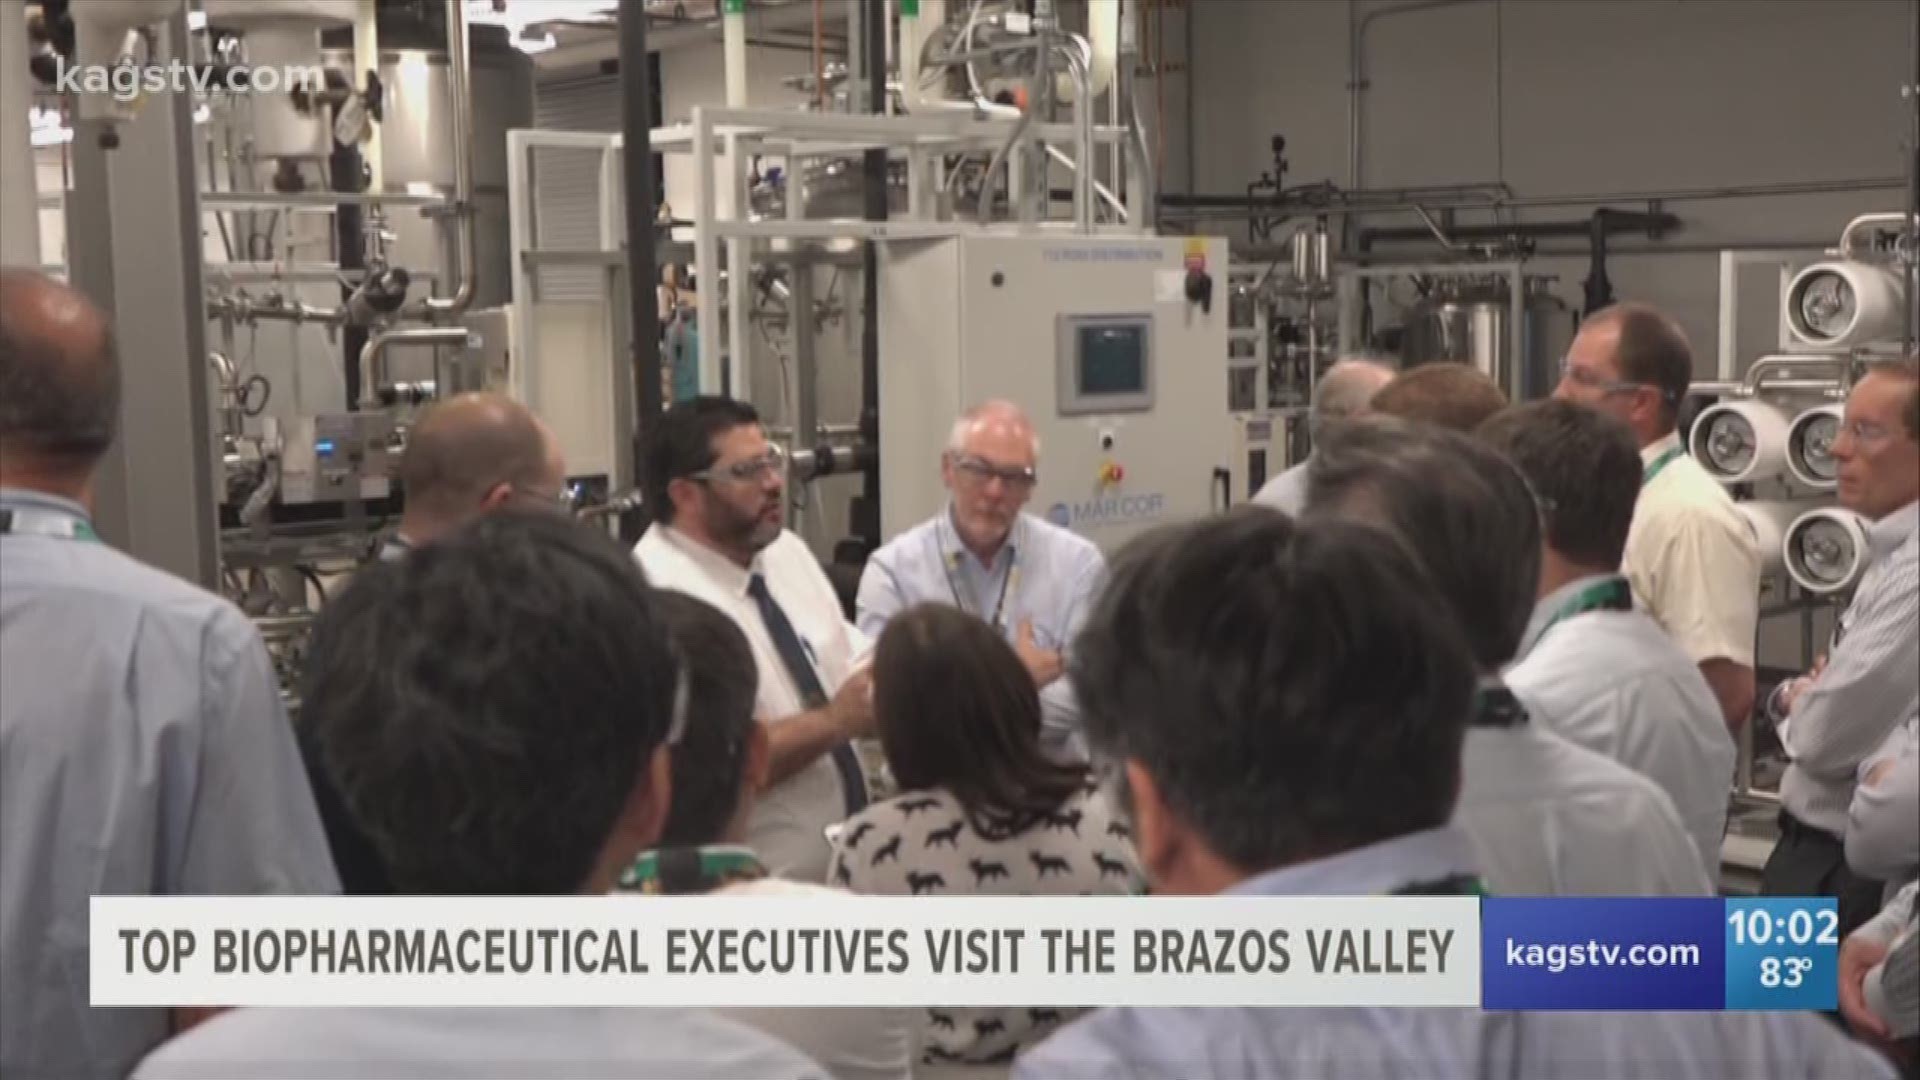 This year the annual meeting, BioPhorum, was held in the Brazos Valley.